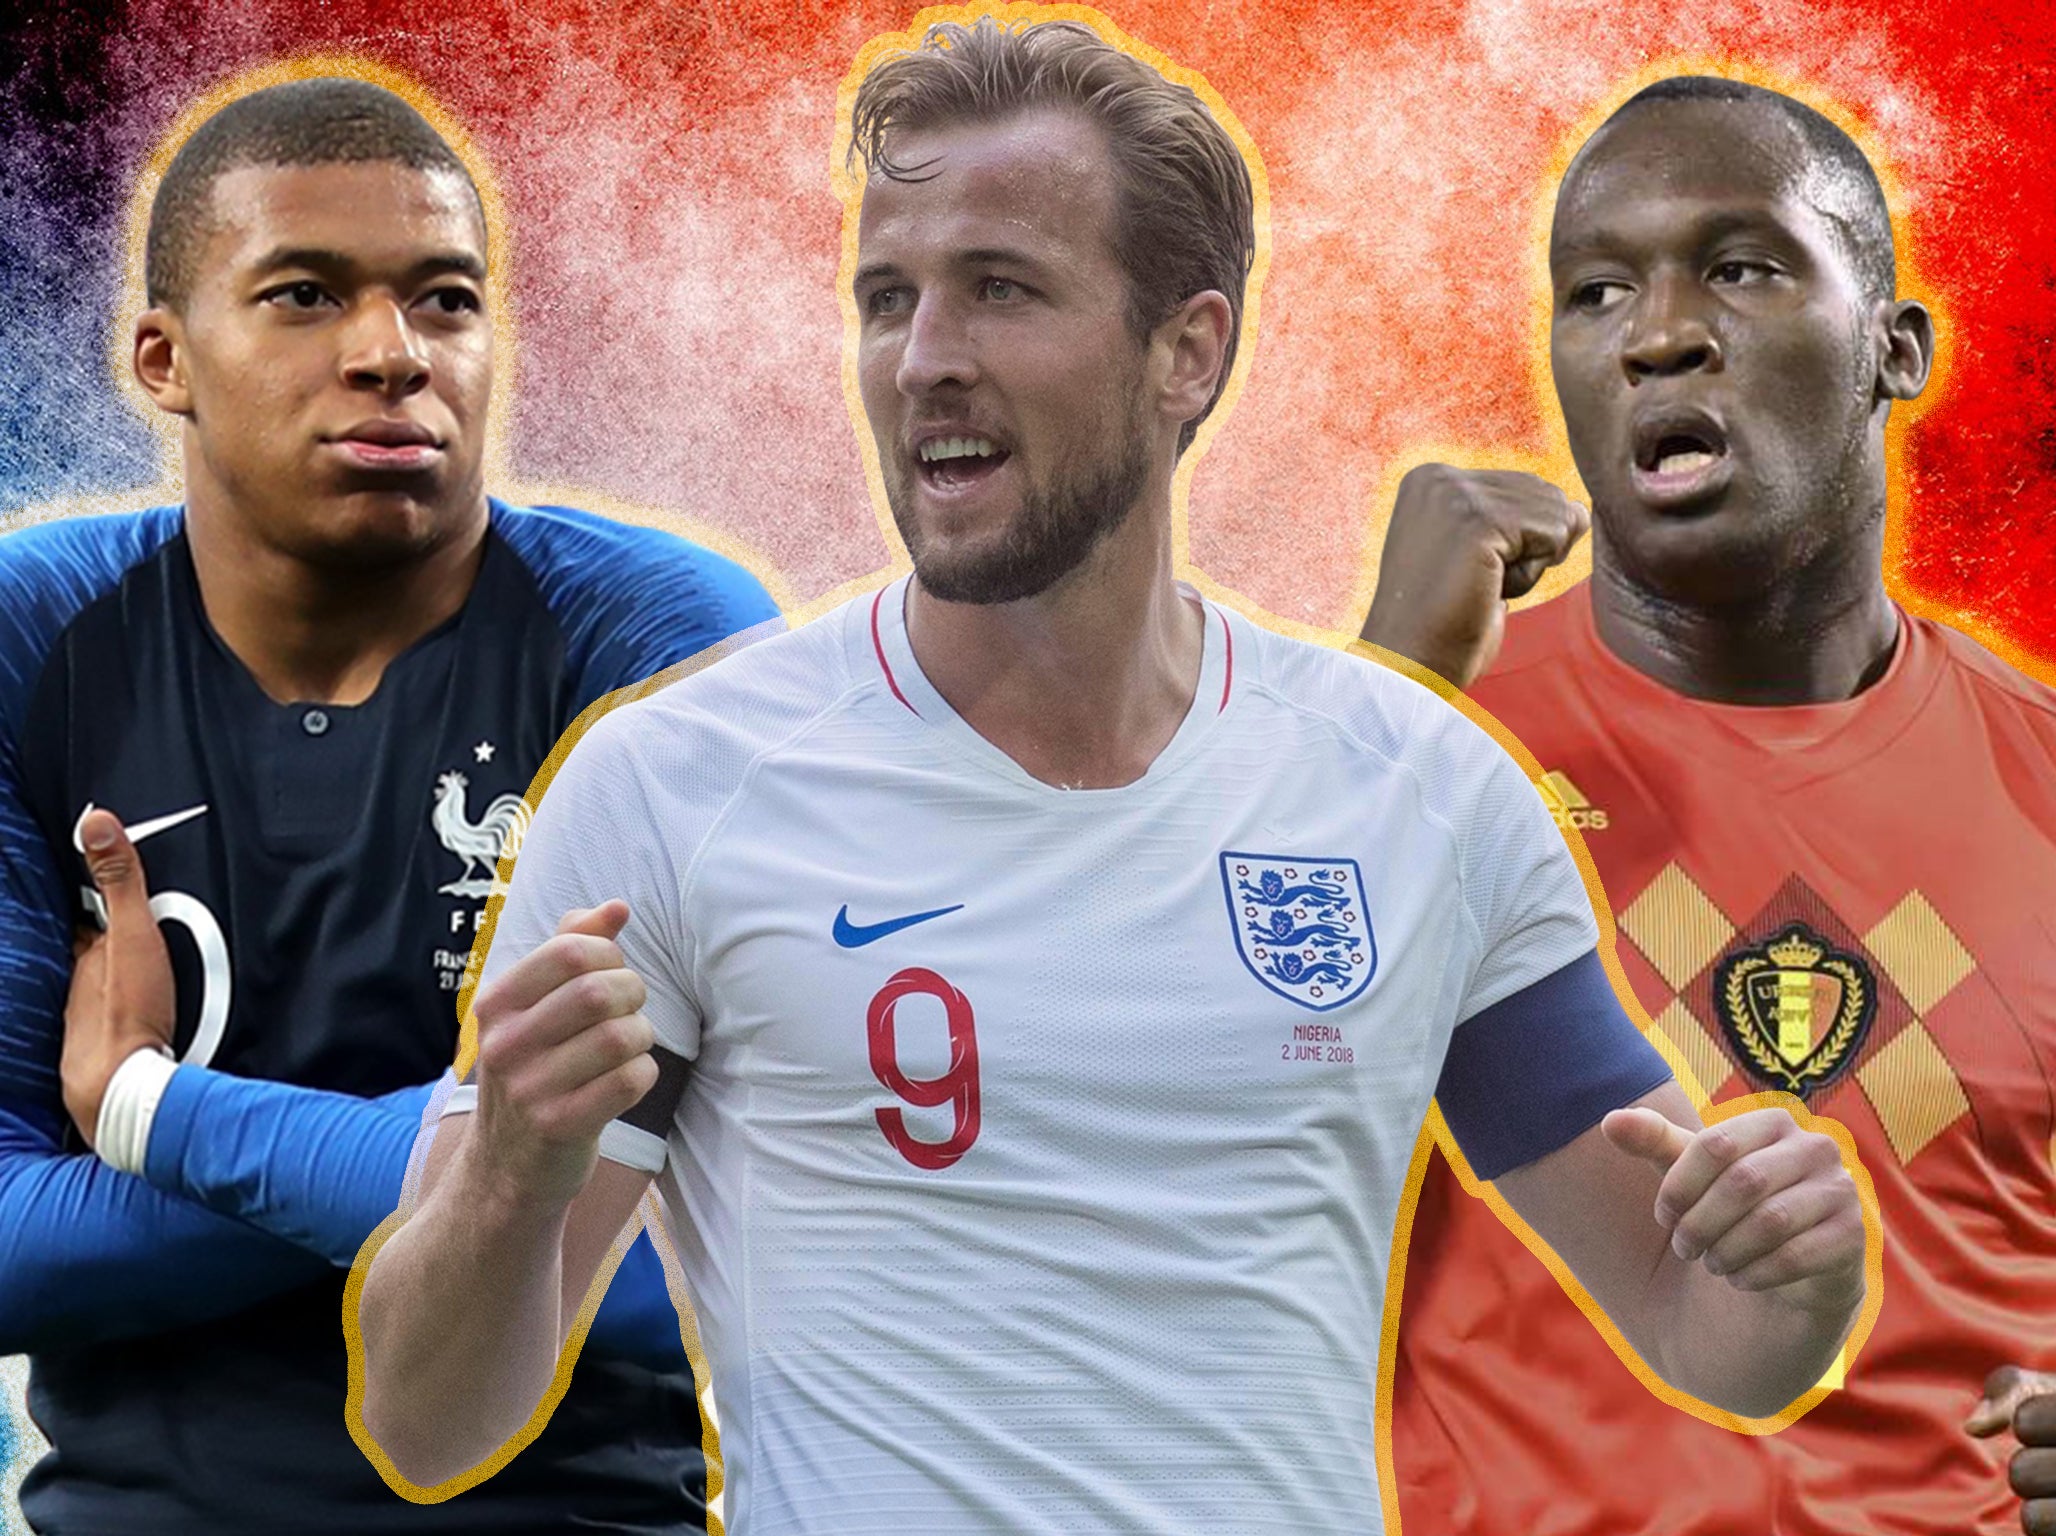 Gå rundt fiber Oswald World Cup golden boot 2018: Harry Kane, Romelu Lukaku or Kylian Mbappe -  who will win race to be top goal scorer? | The Independent | The Independent